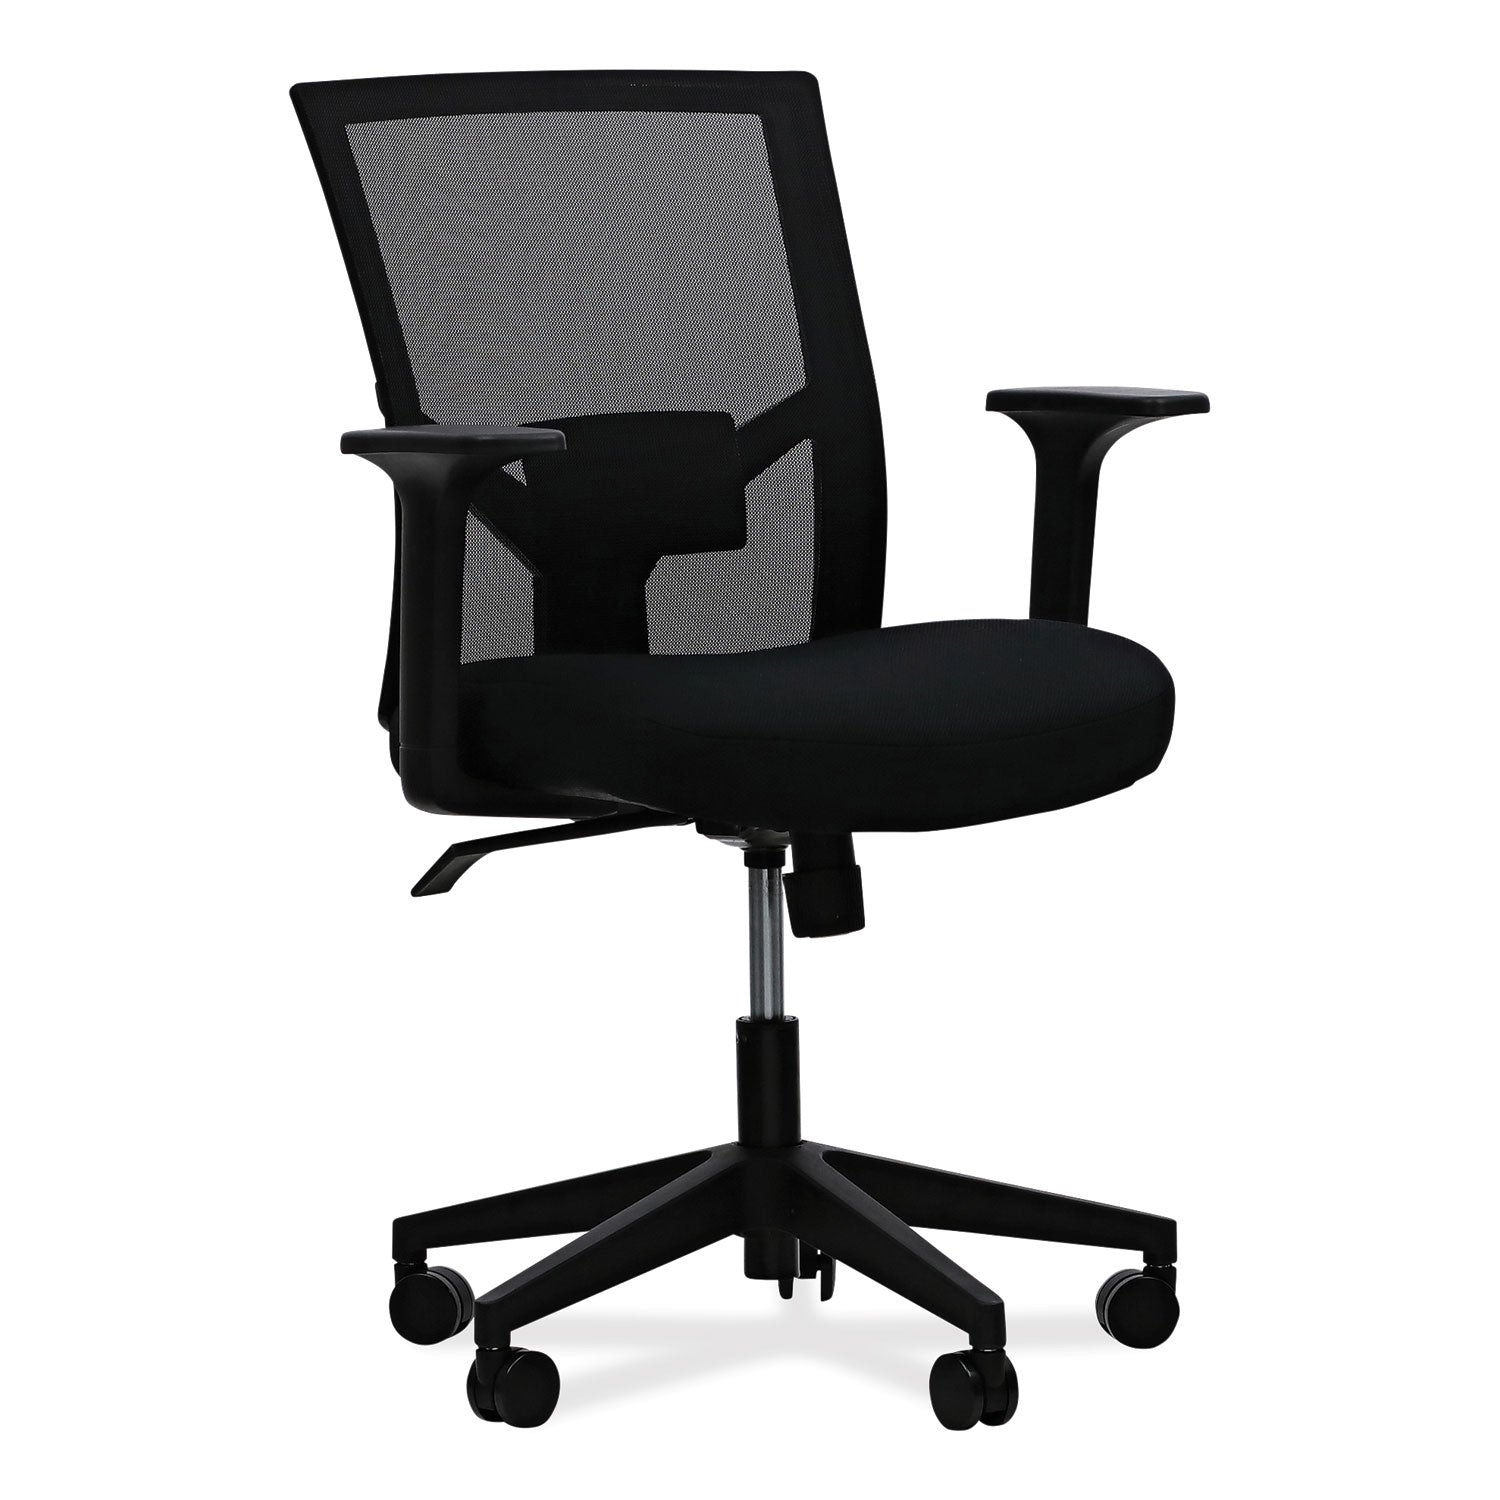 mesh-back-fabric-task-chair-supports-up-to-275-lb-1732-to-211-seat-height-black-seat-black-back_alews42b17 - 1